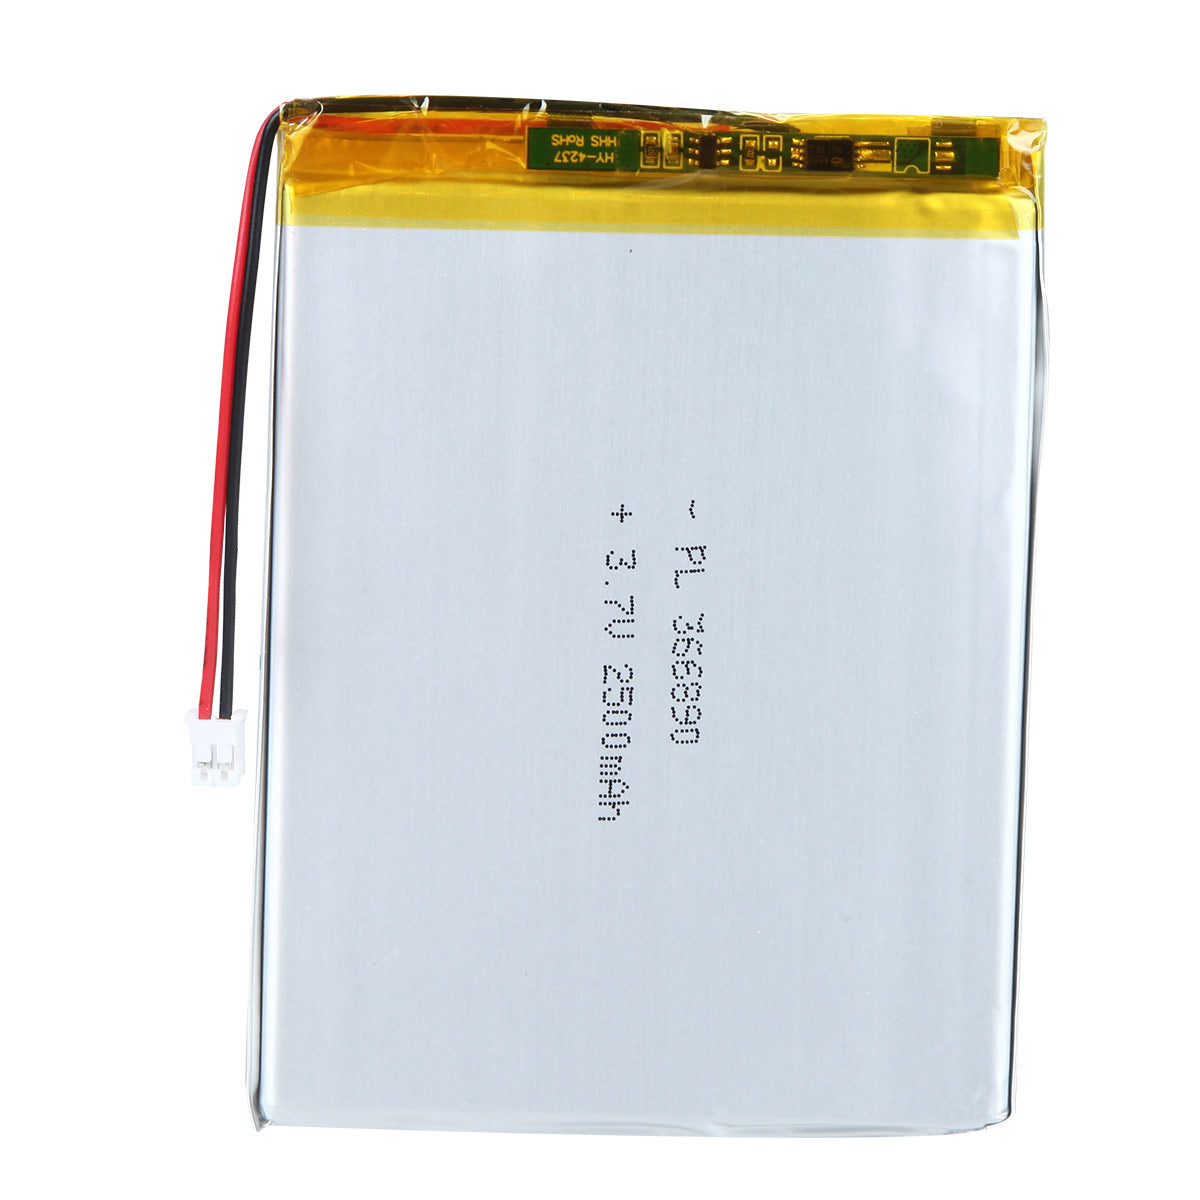 YDL 3.7V 2500mAh 366890 Rechargeable Lithium Polymer Battery Length 92mm